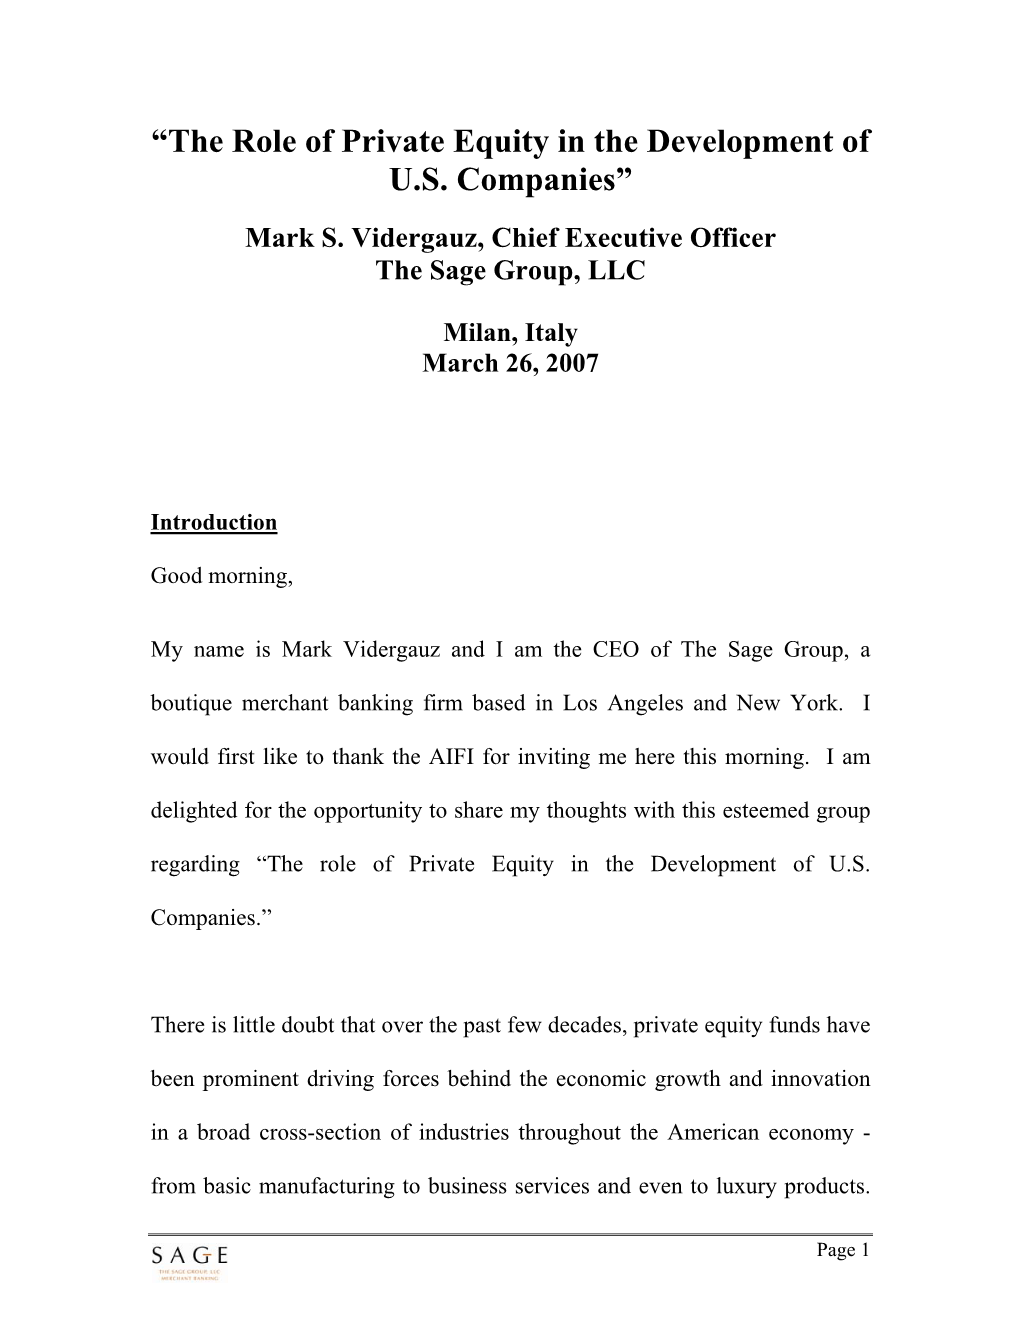 “The Role of Private Equity in the Development of U.S. Companies”